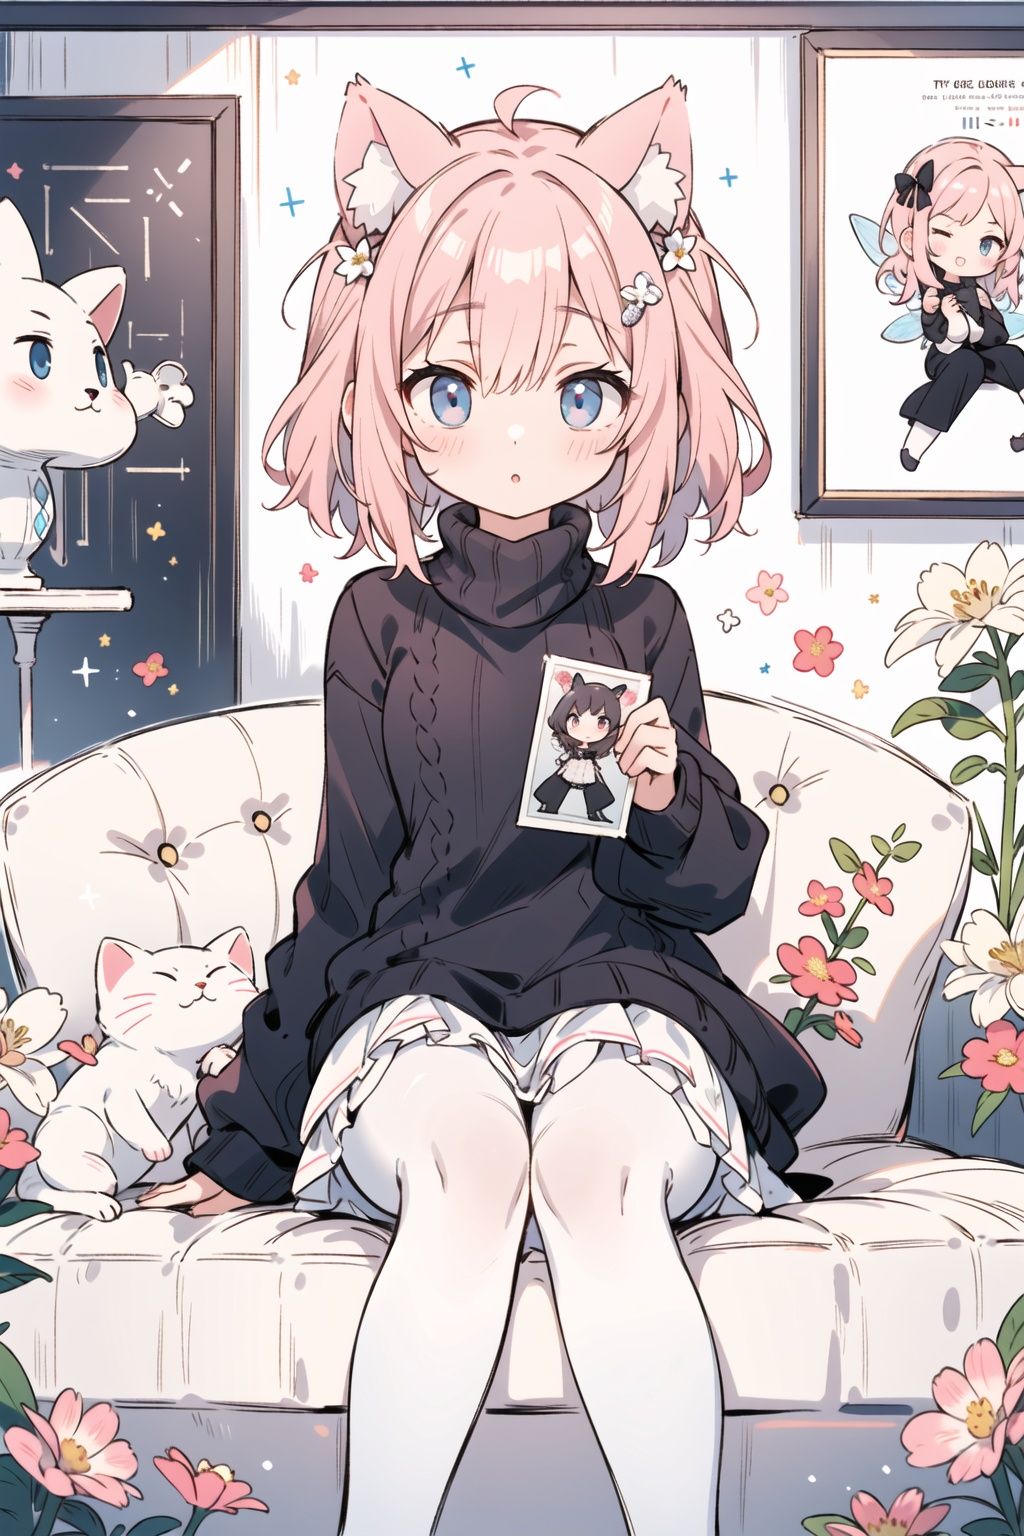 Masterpiece,best quality,(sense of design),poster ((poster design)) (front) room,window,girl sitting on sofa,short pink hair,a pair of fluffy cat ears,black sweater,white pantyhose,fairy tale girl,flower,